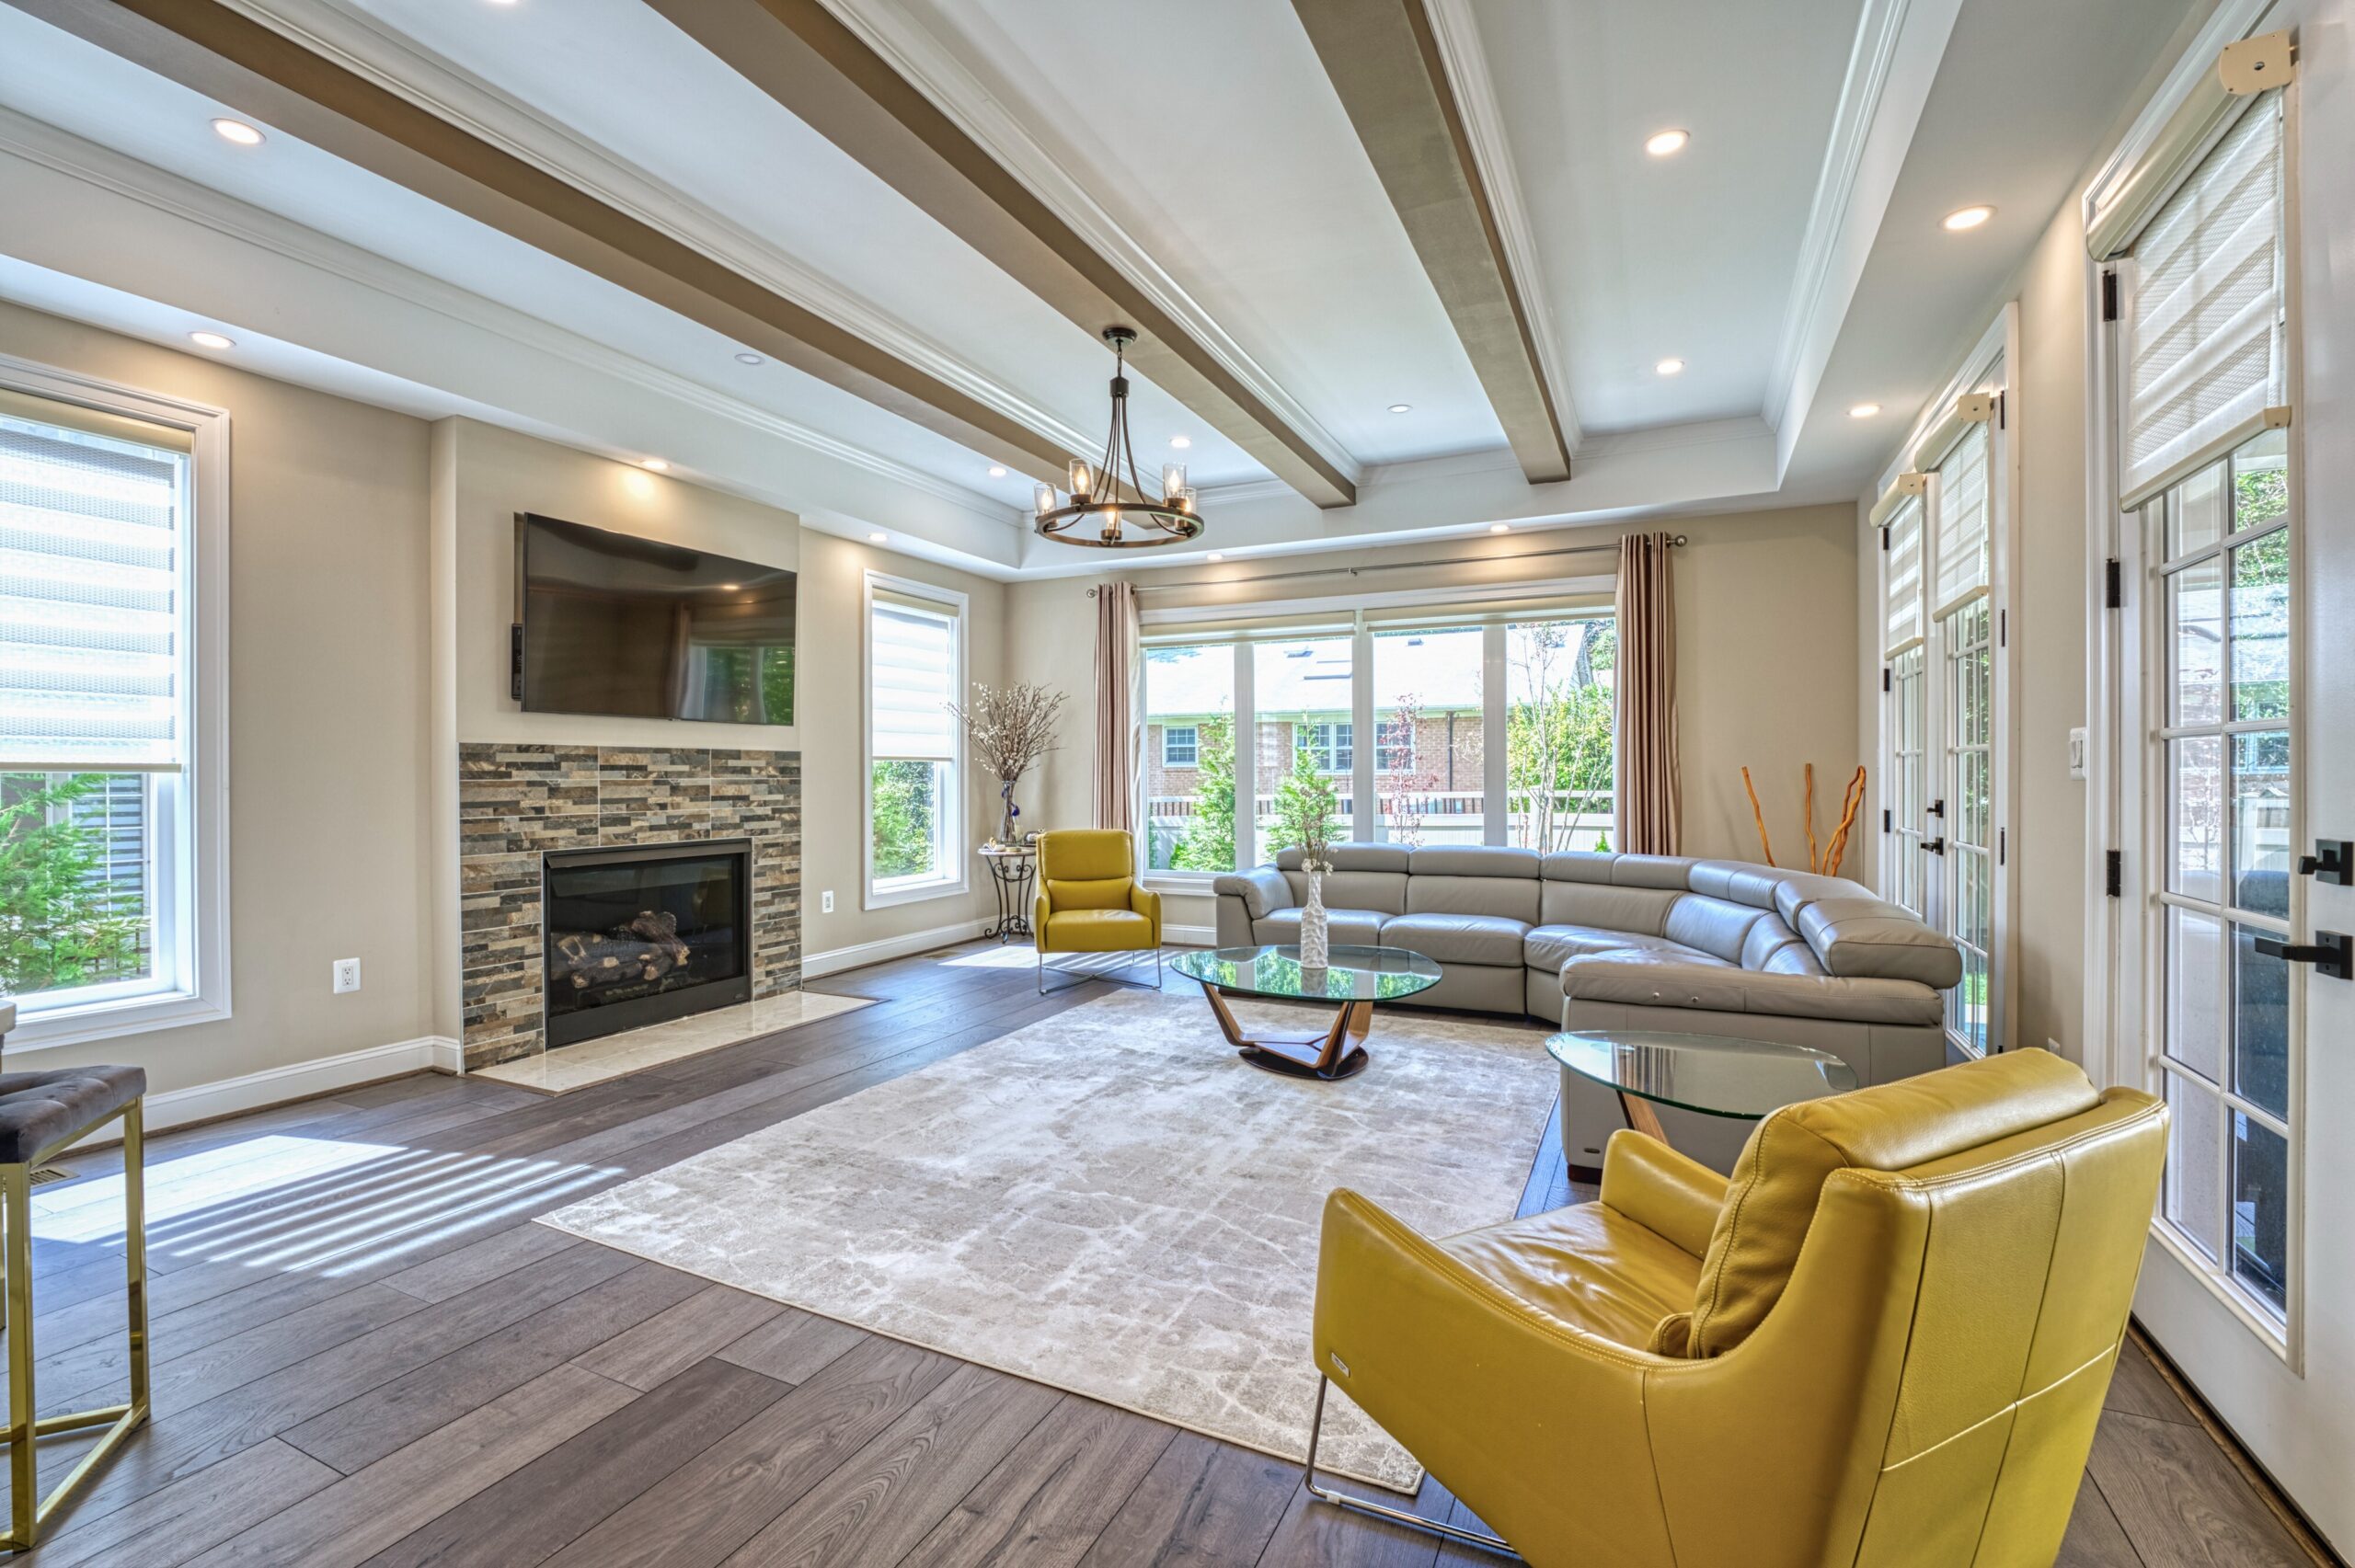 professional Fusion photo of the interior of a home in McLean, VA - showing living room with tray ceiling with exposed beams, windows on 3 sides and gas fireplace.